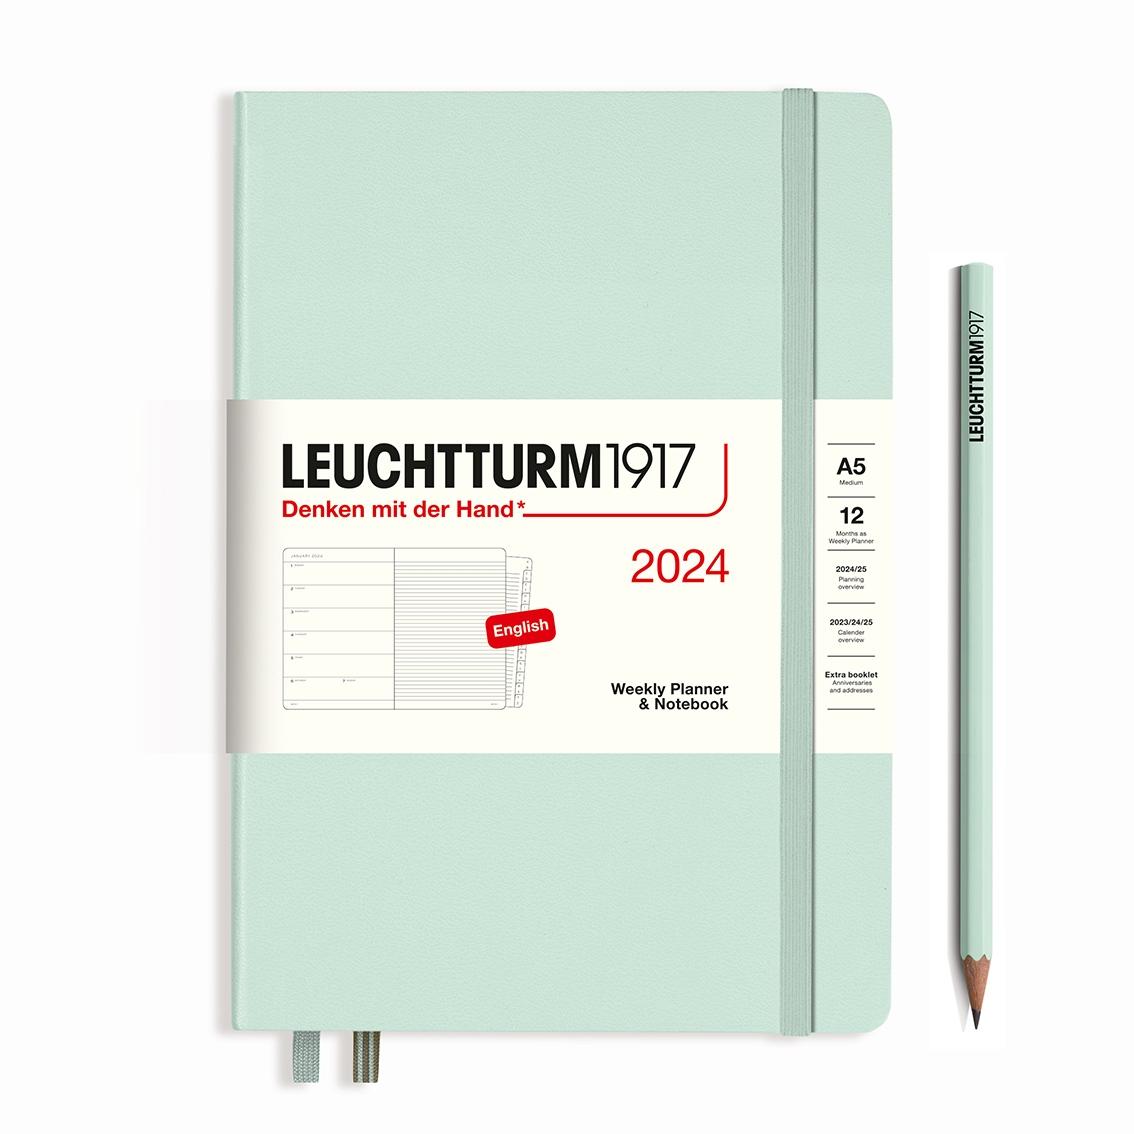 hardcover weekly planner and notebook 2024 medium mint green by leuchtturm1917